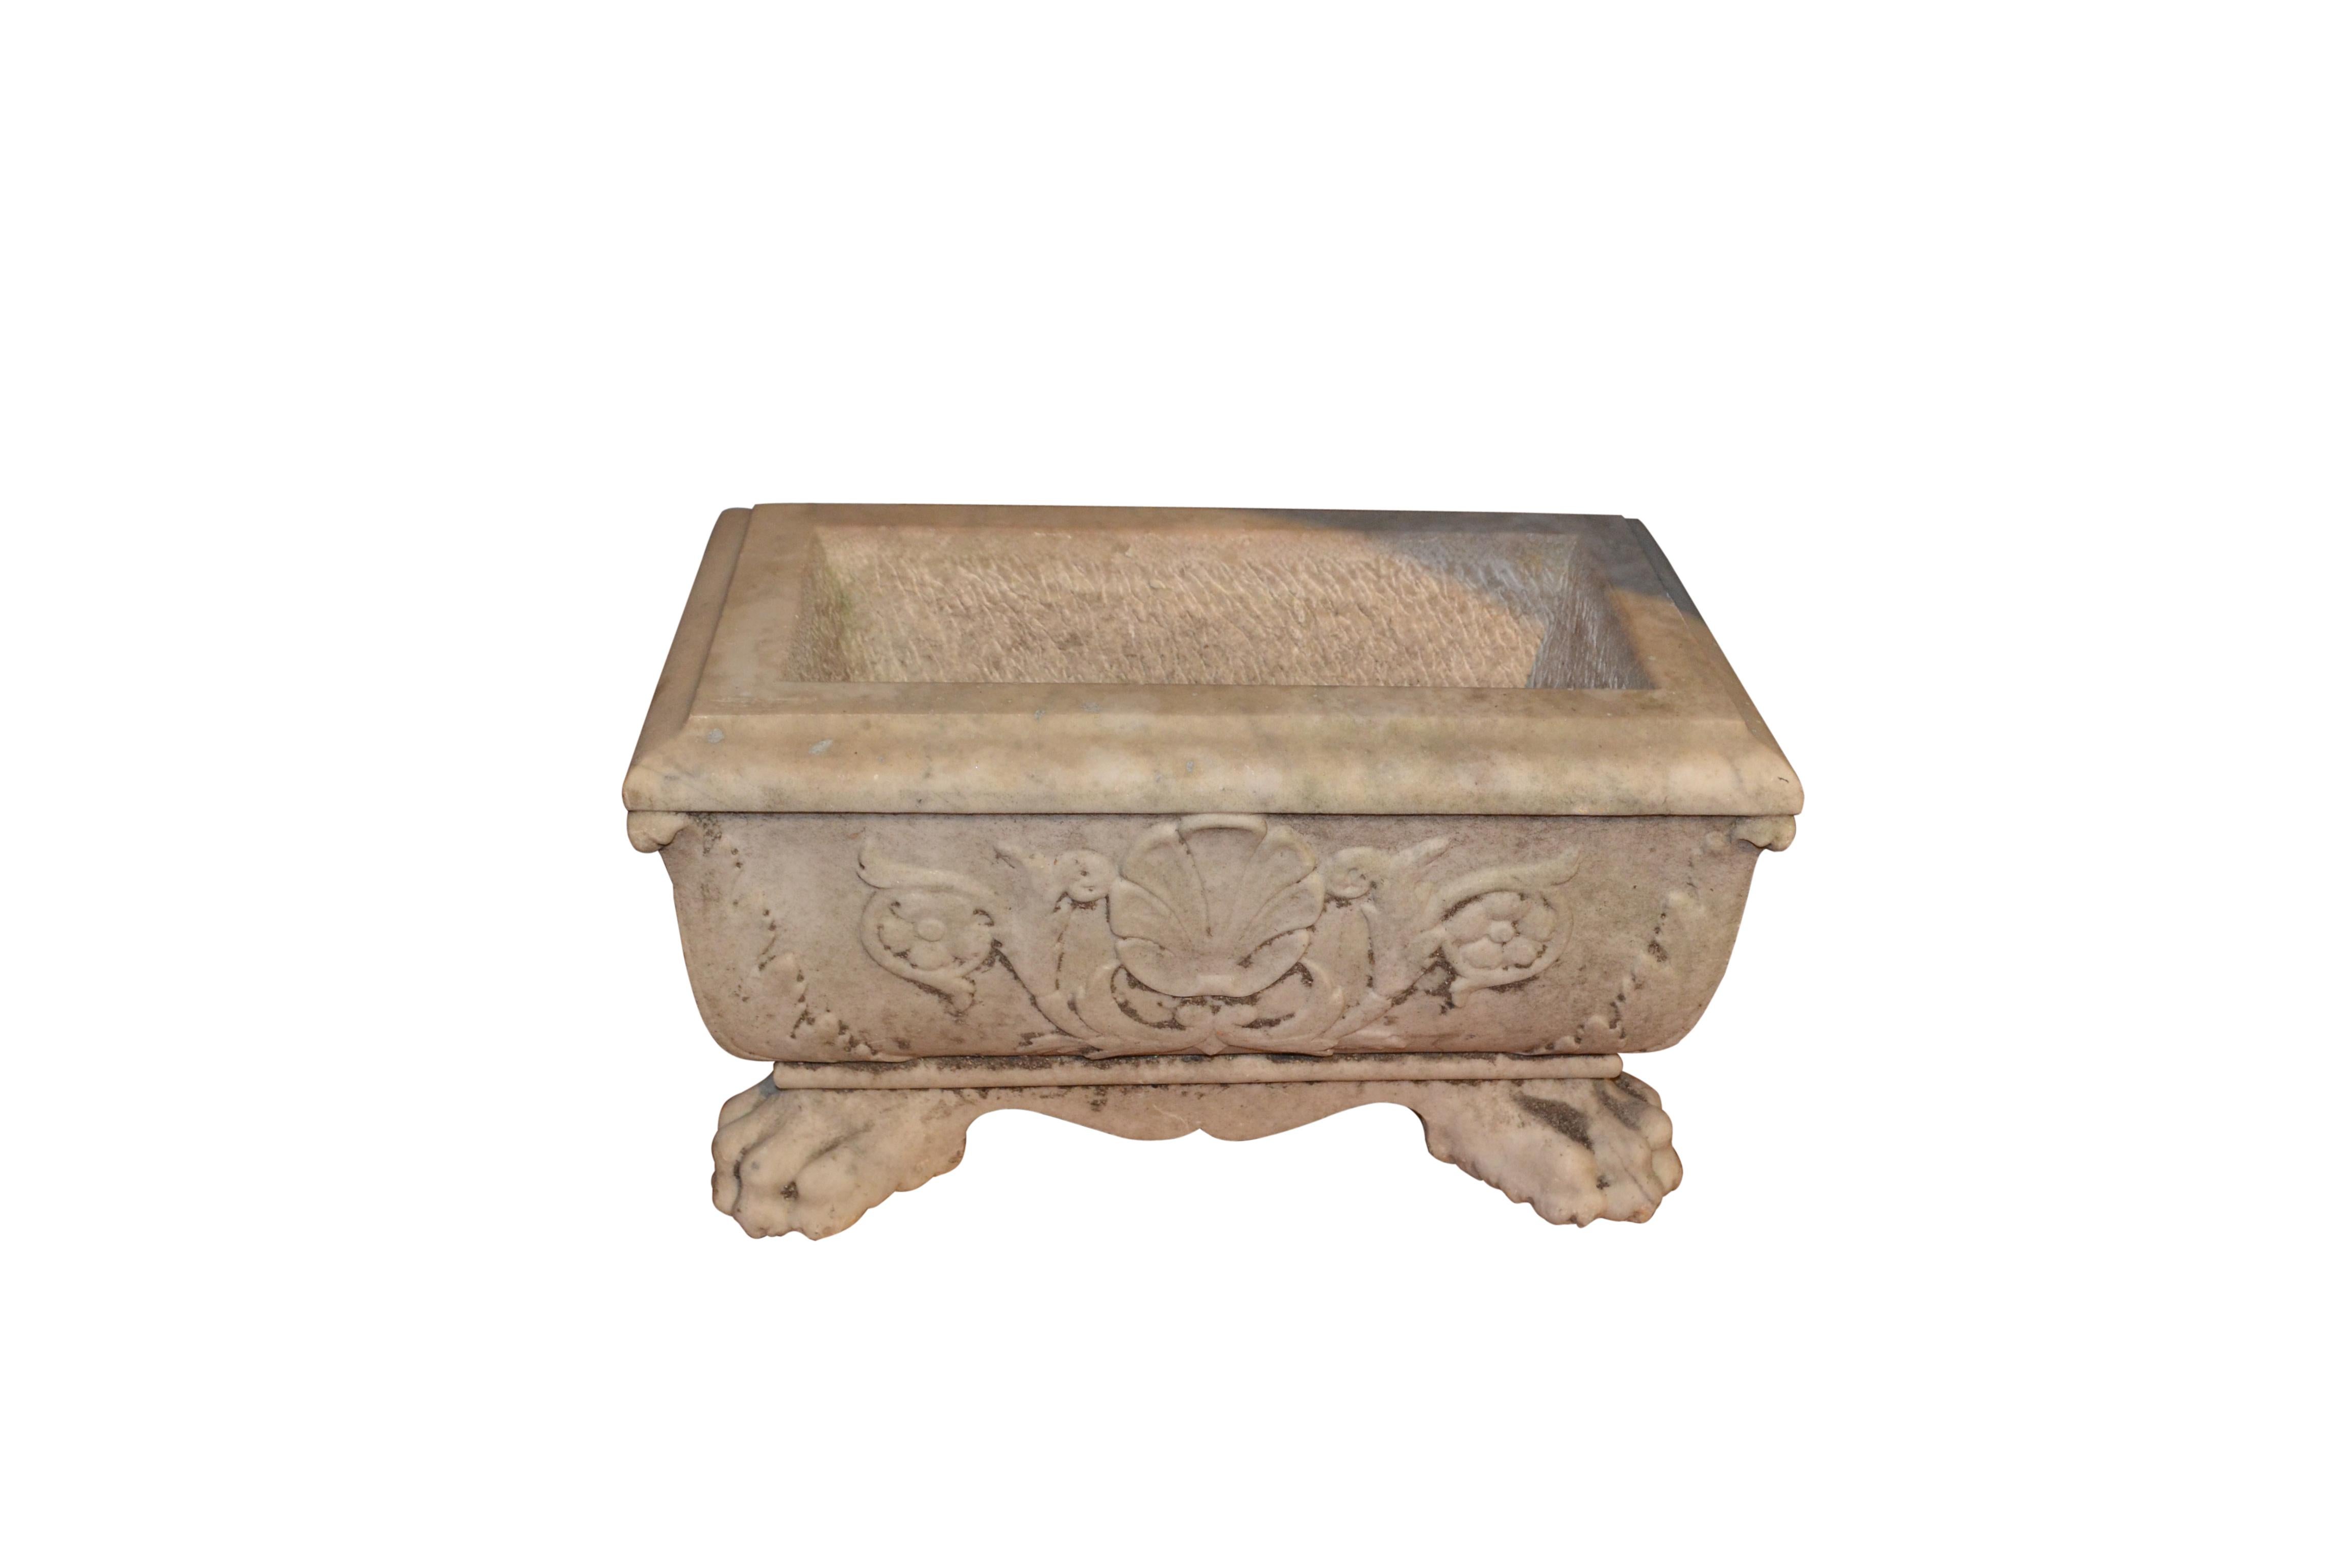  Late 19 Century Italian Neo-Classical Carved Carrara Marble Planter  In Good Condition For Sale In Vancouver, British Columbia